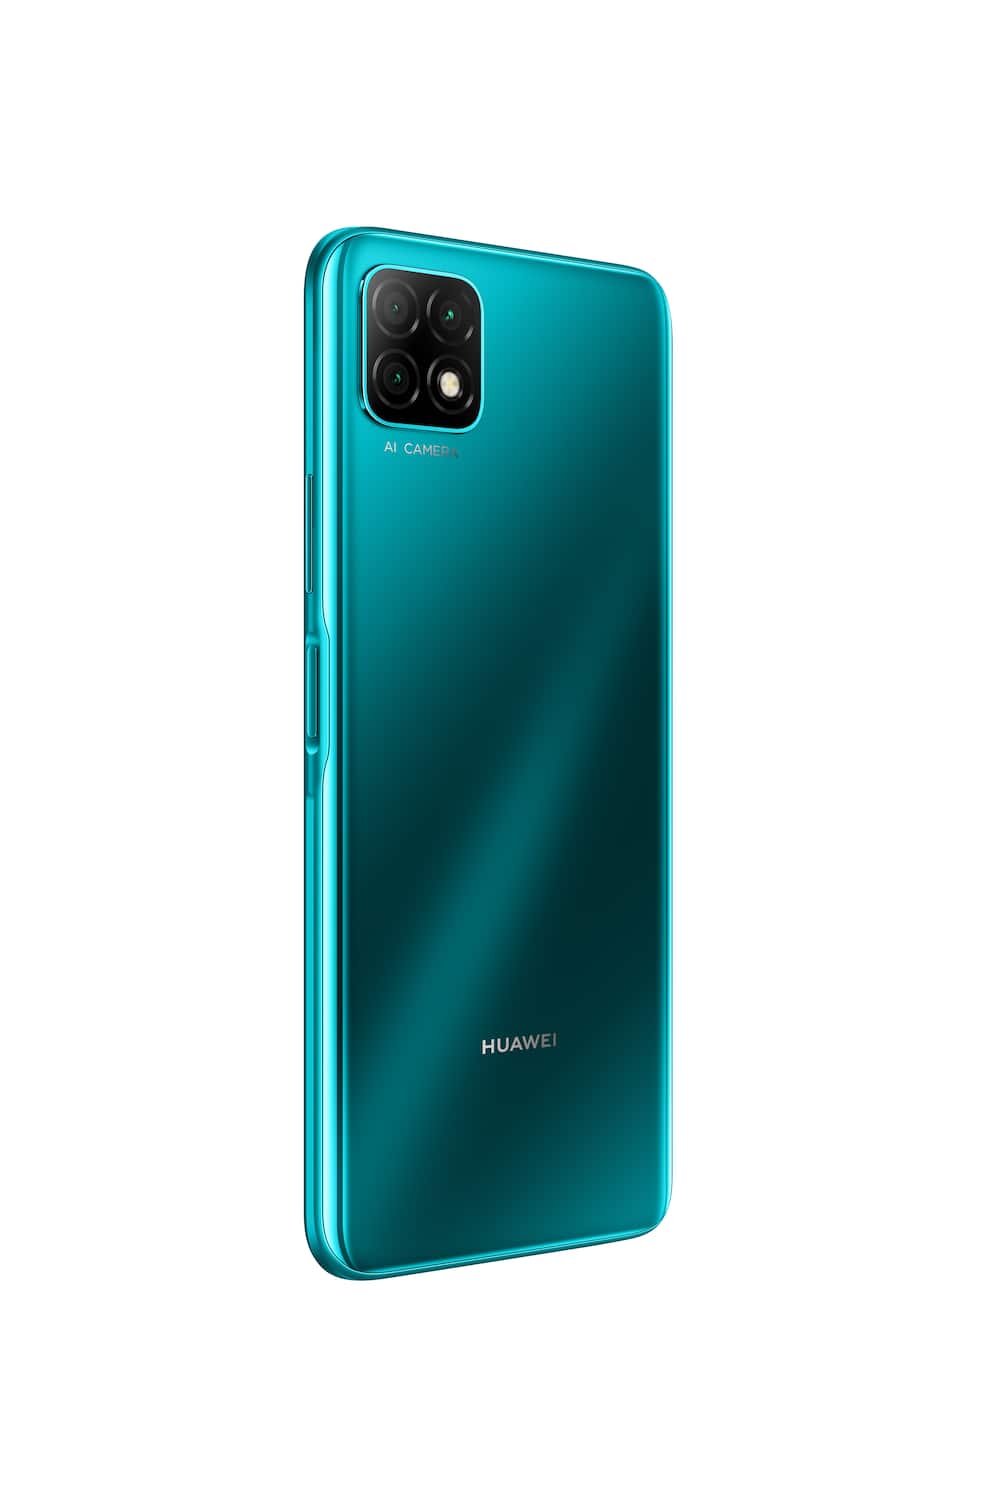 Huawei launches the all-new nova Y60 series in South Africa